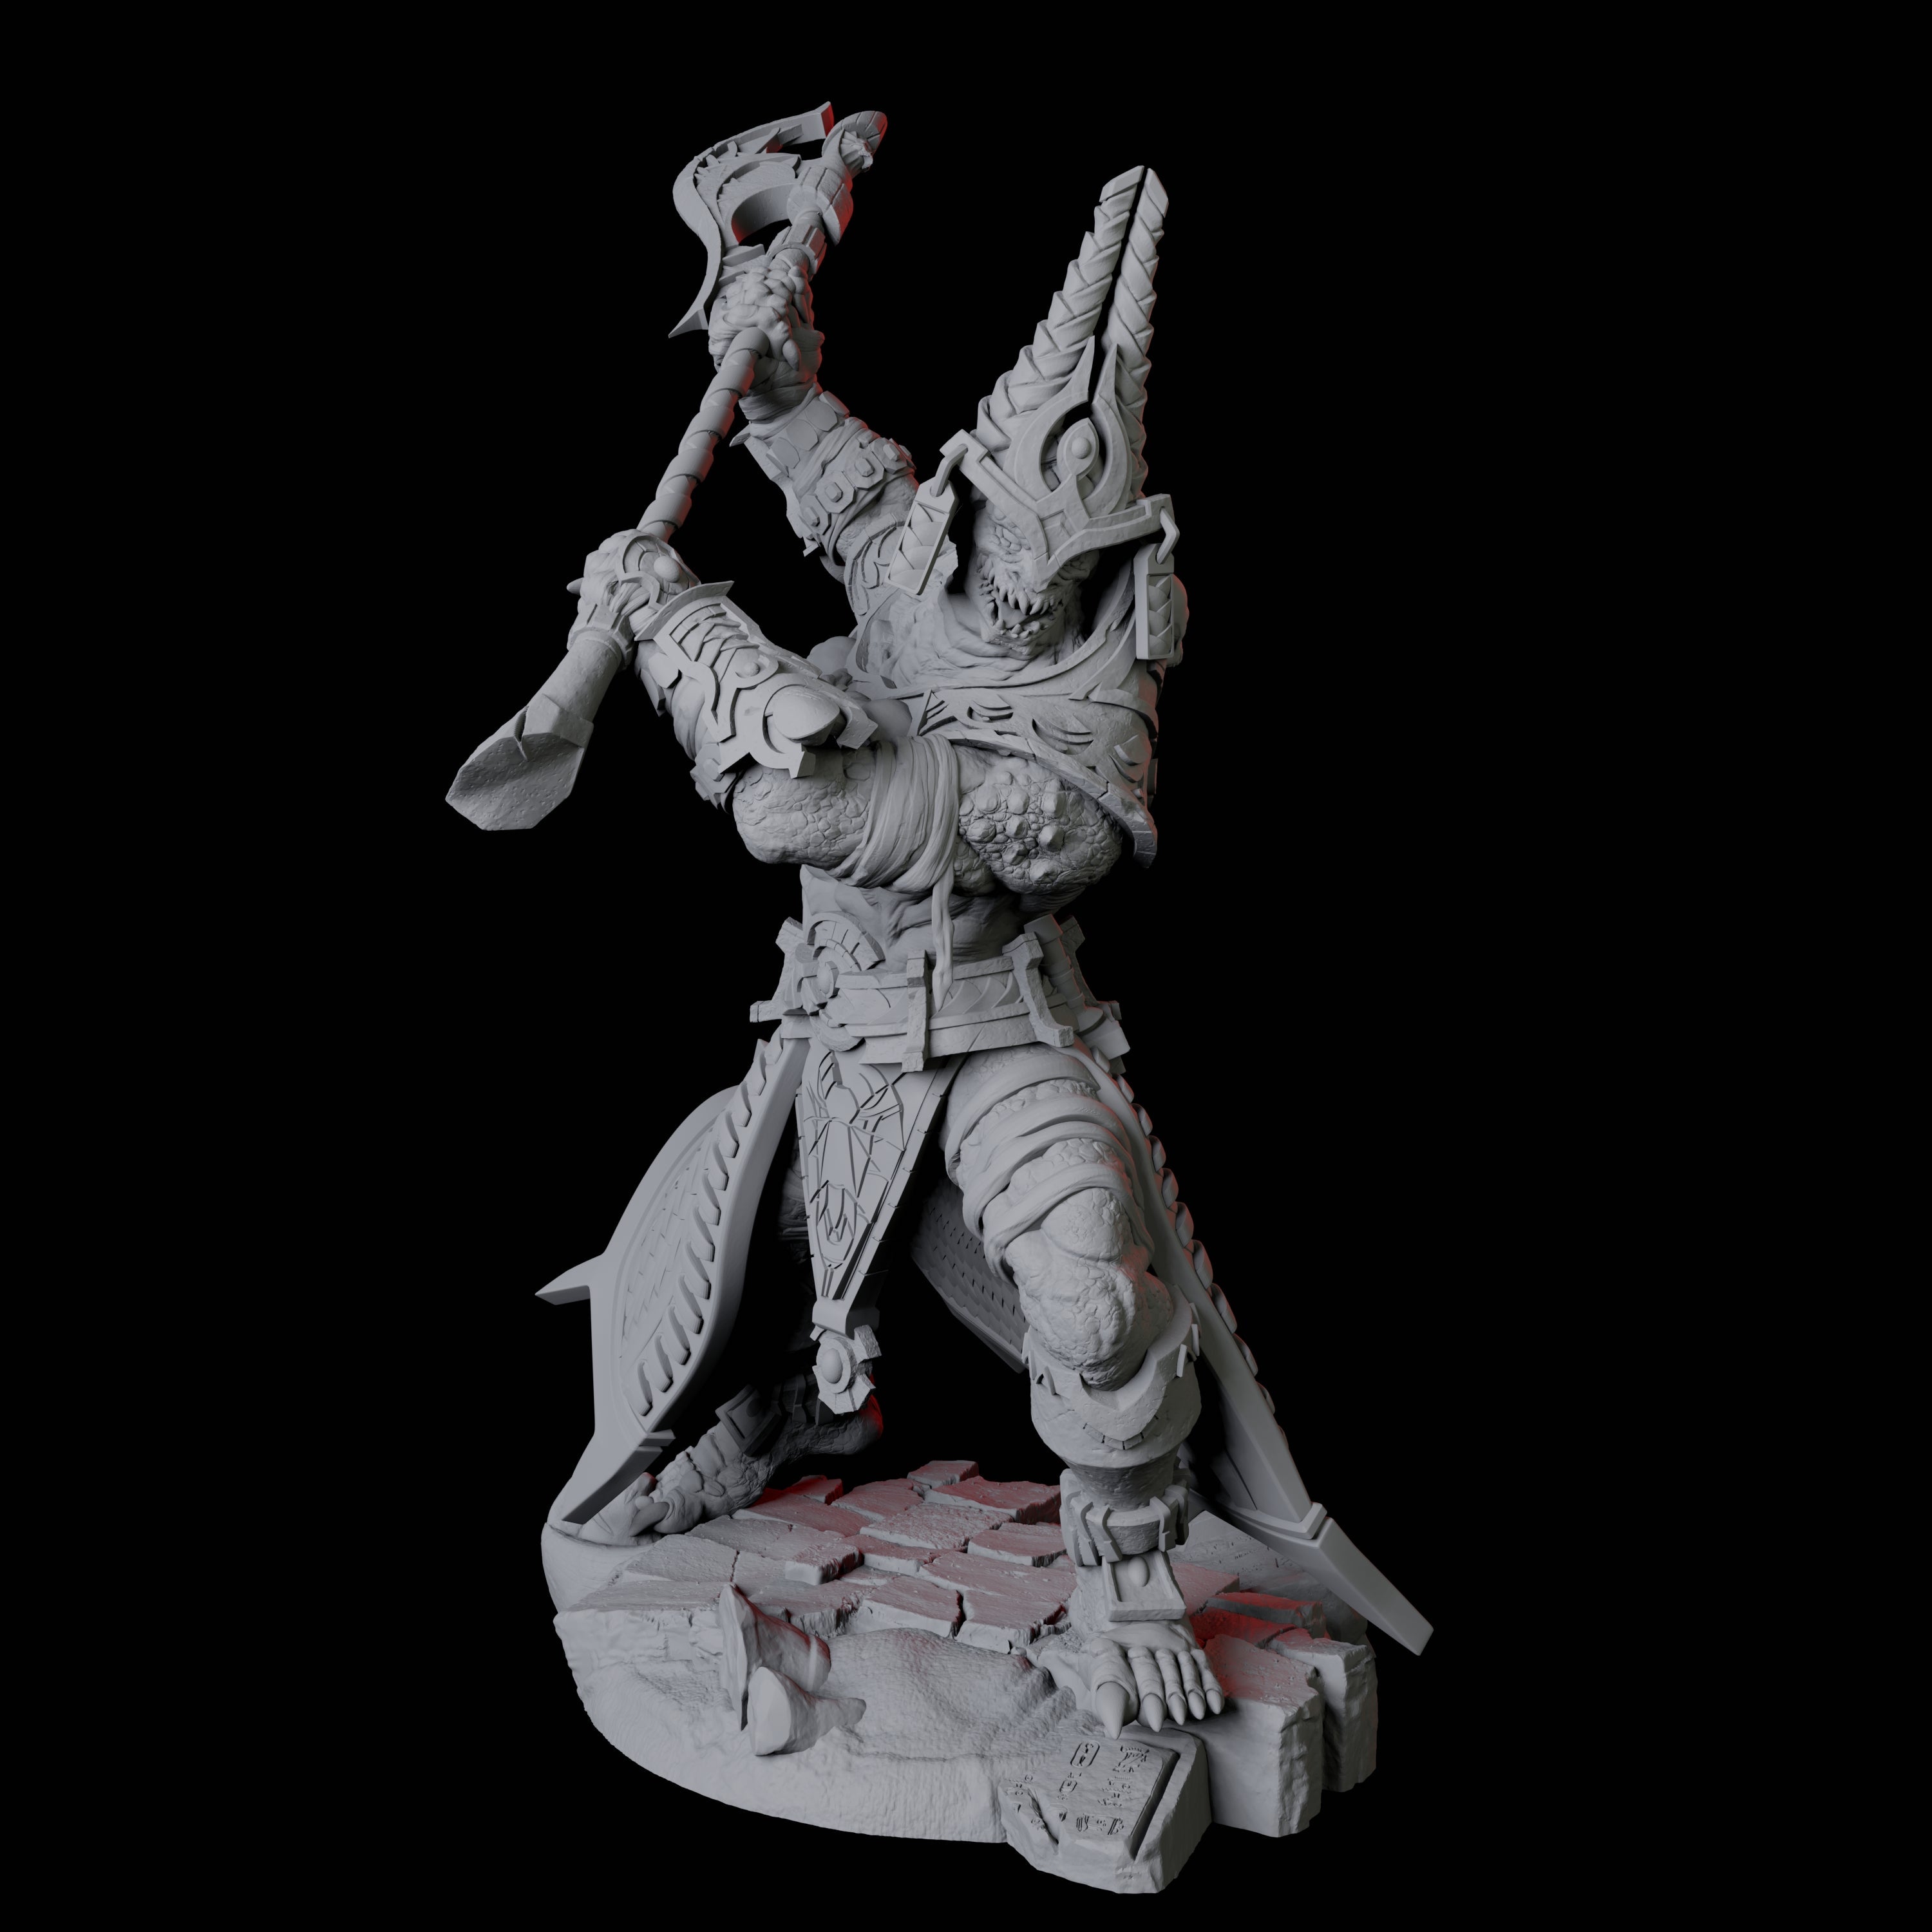 Four Saurian War Priests Miniature for Dungeons and Dragons, Pathfinder or other TTRPGs